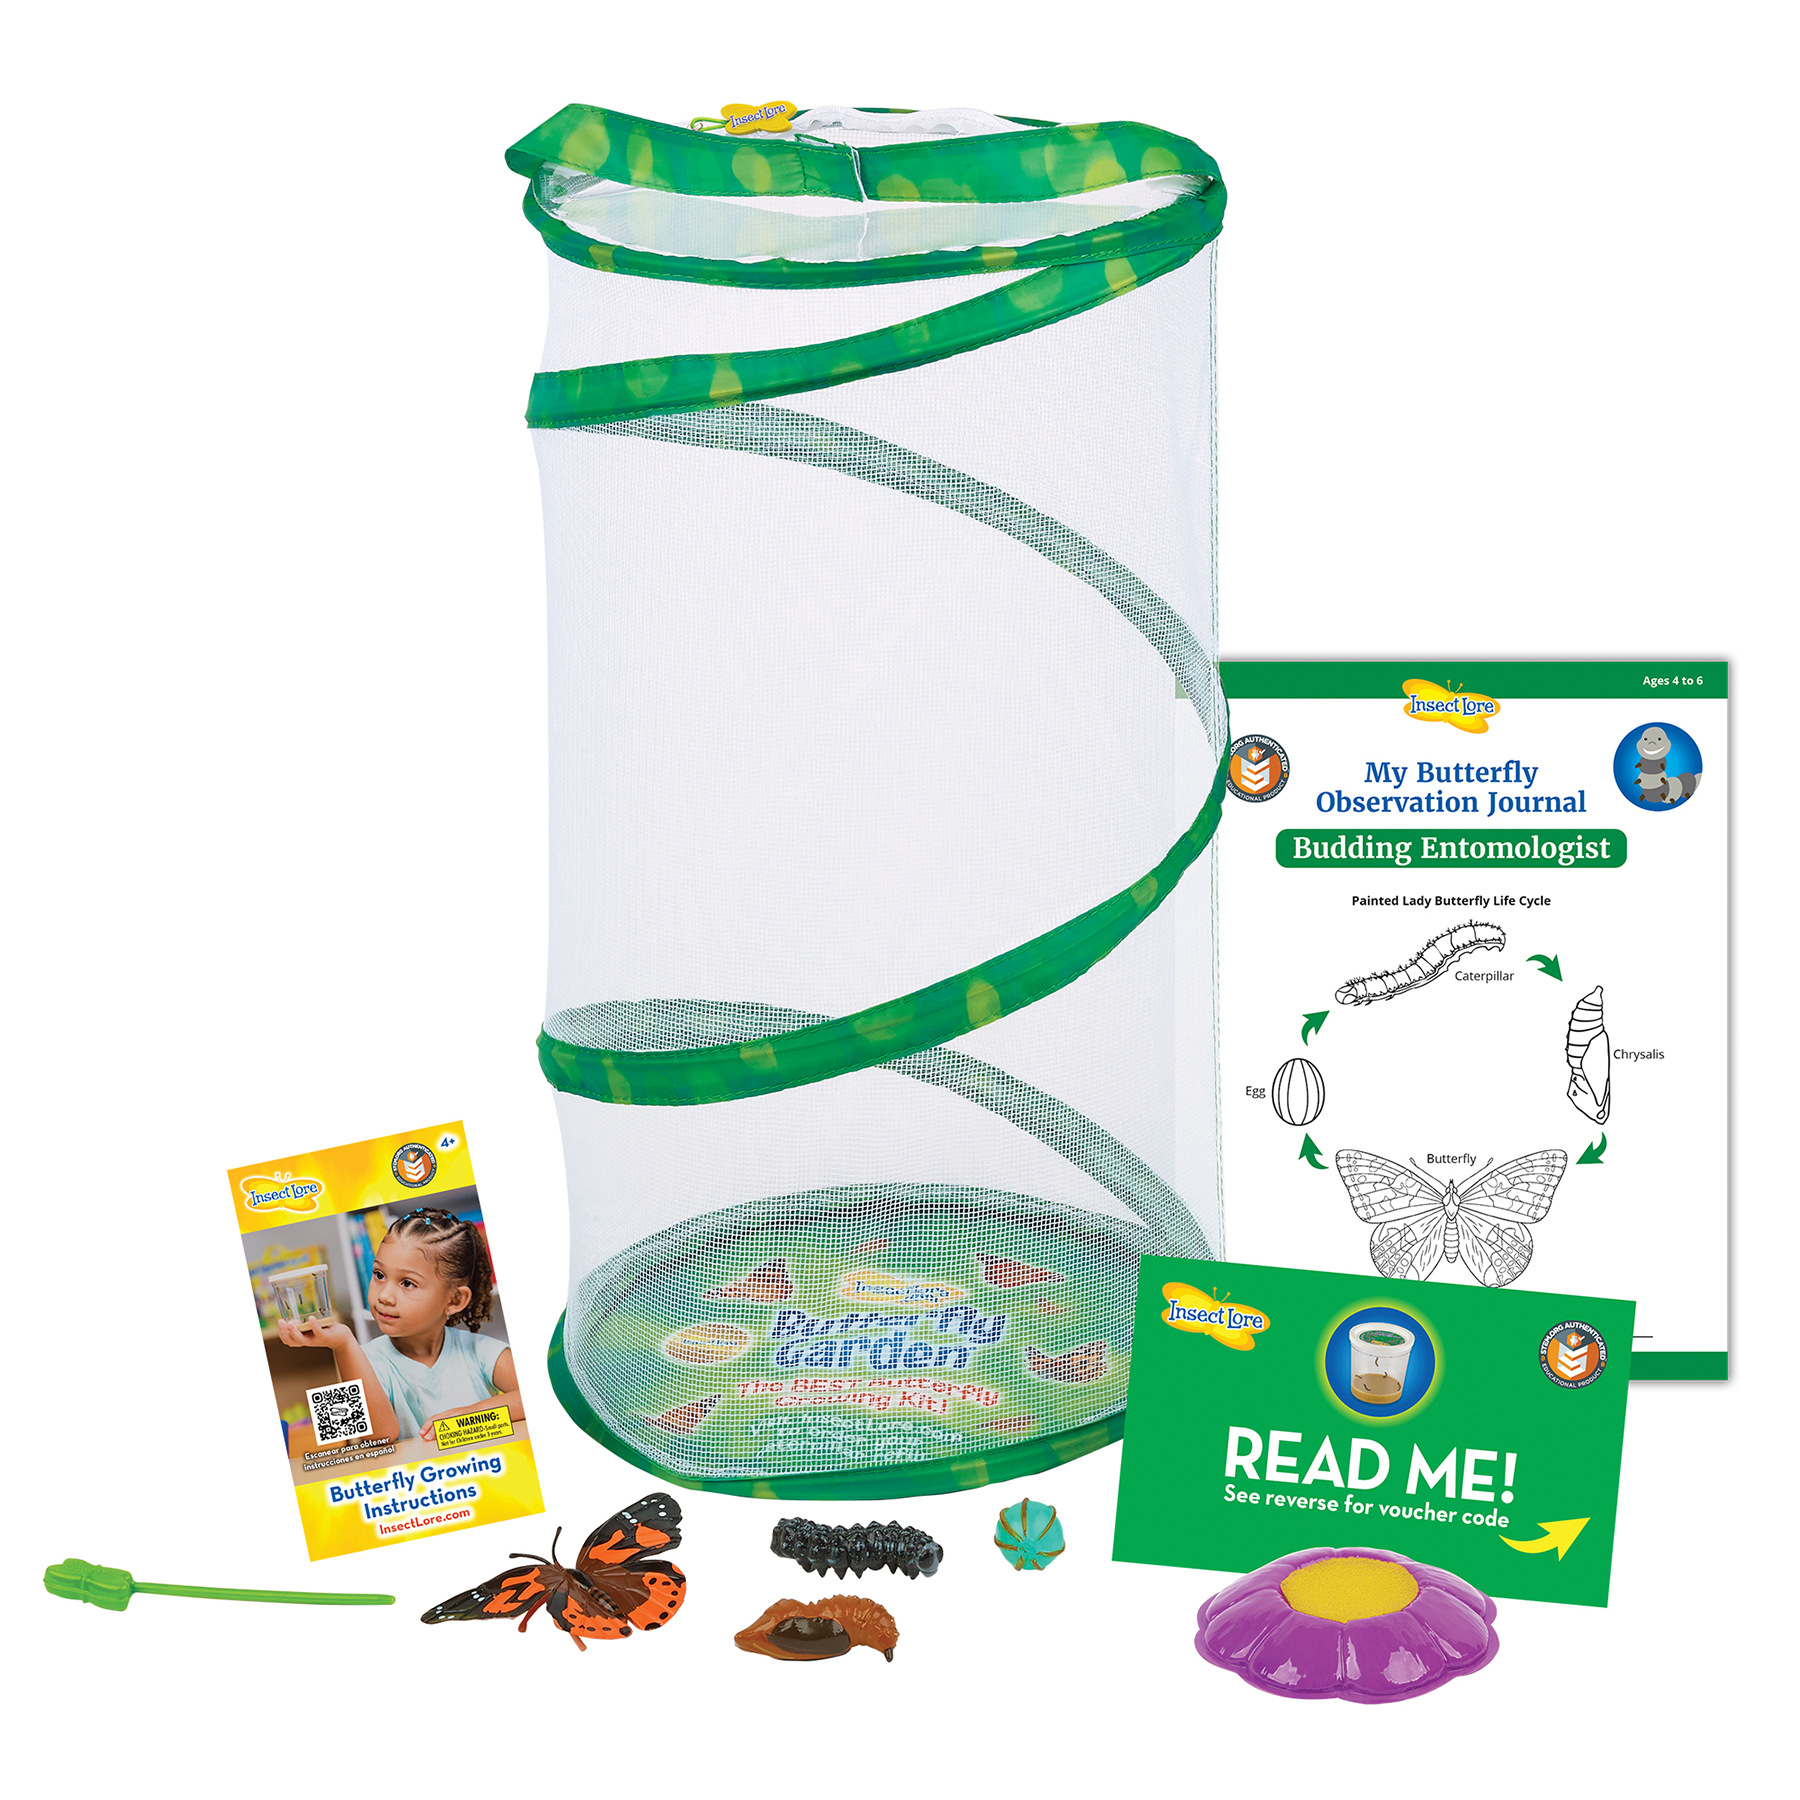 Insect Lore Giant Butterfly Growing Kit with Voucher and Life Cycle figurines, Caterpillars to Butterfly Deluxe 18 inch Butterfly Growing Garden - image 2 of 12